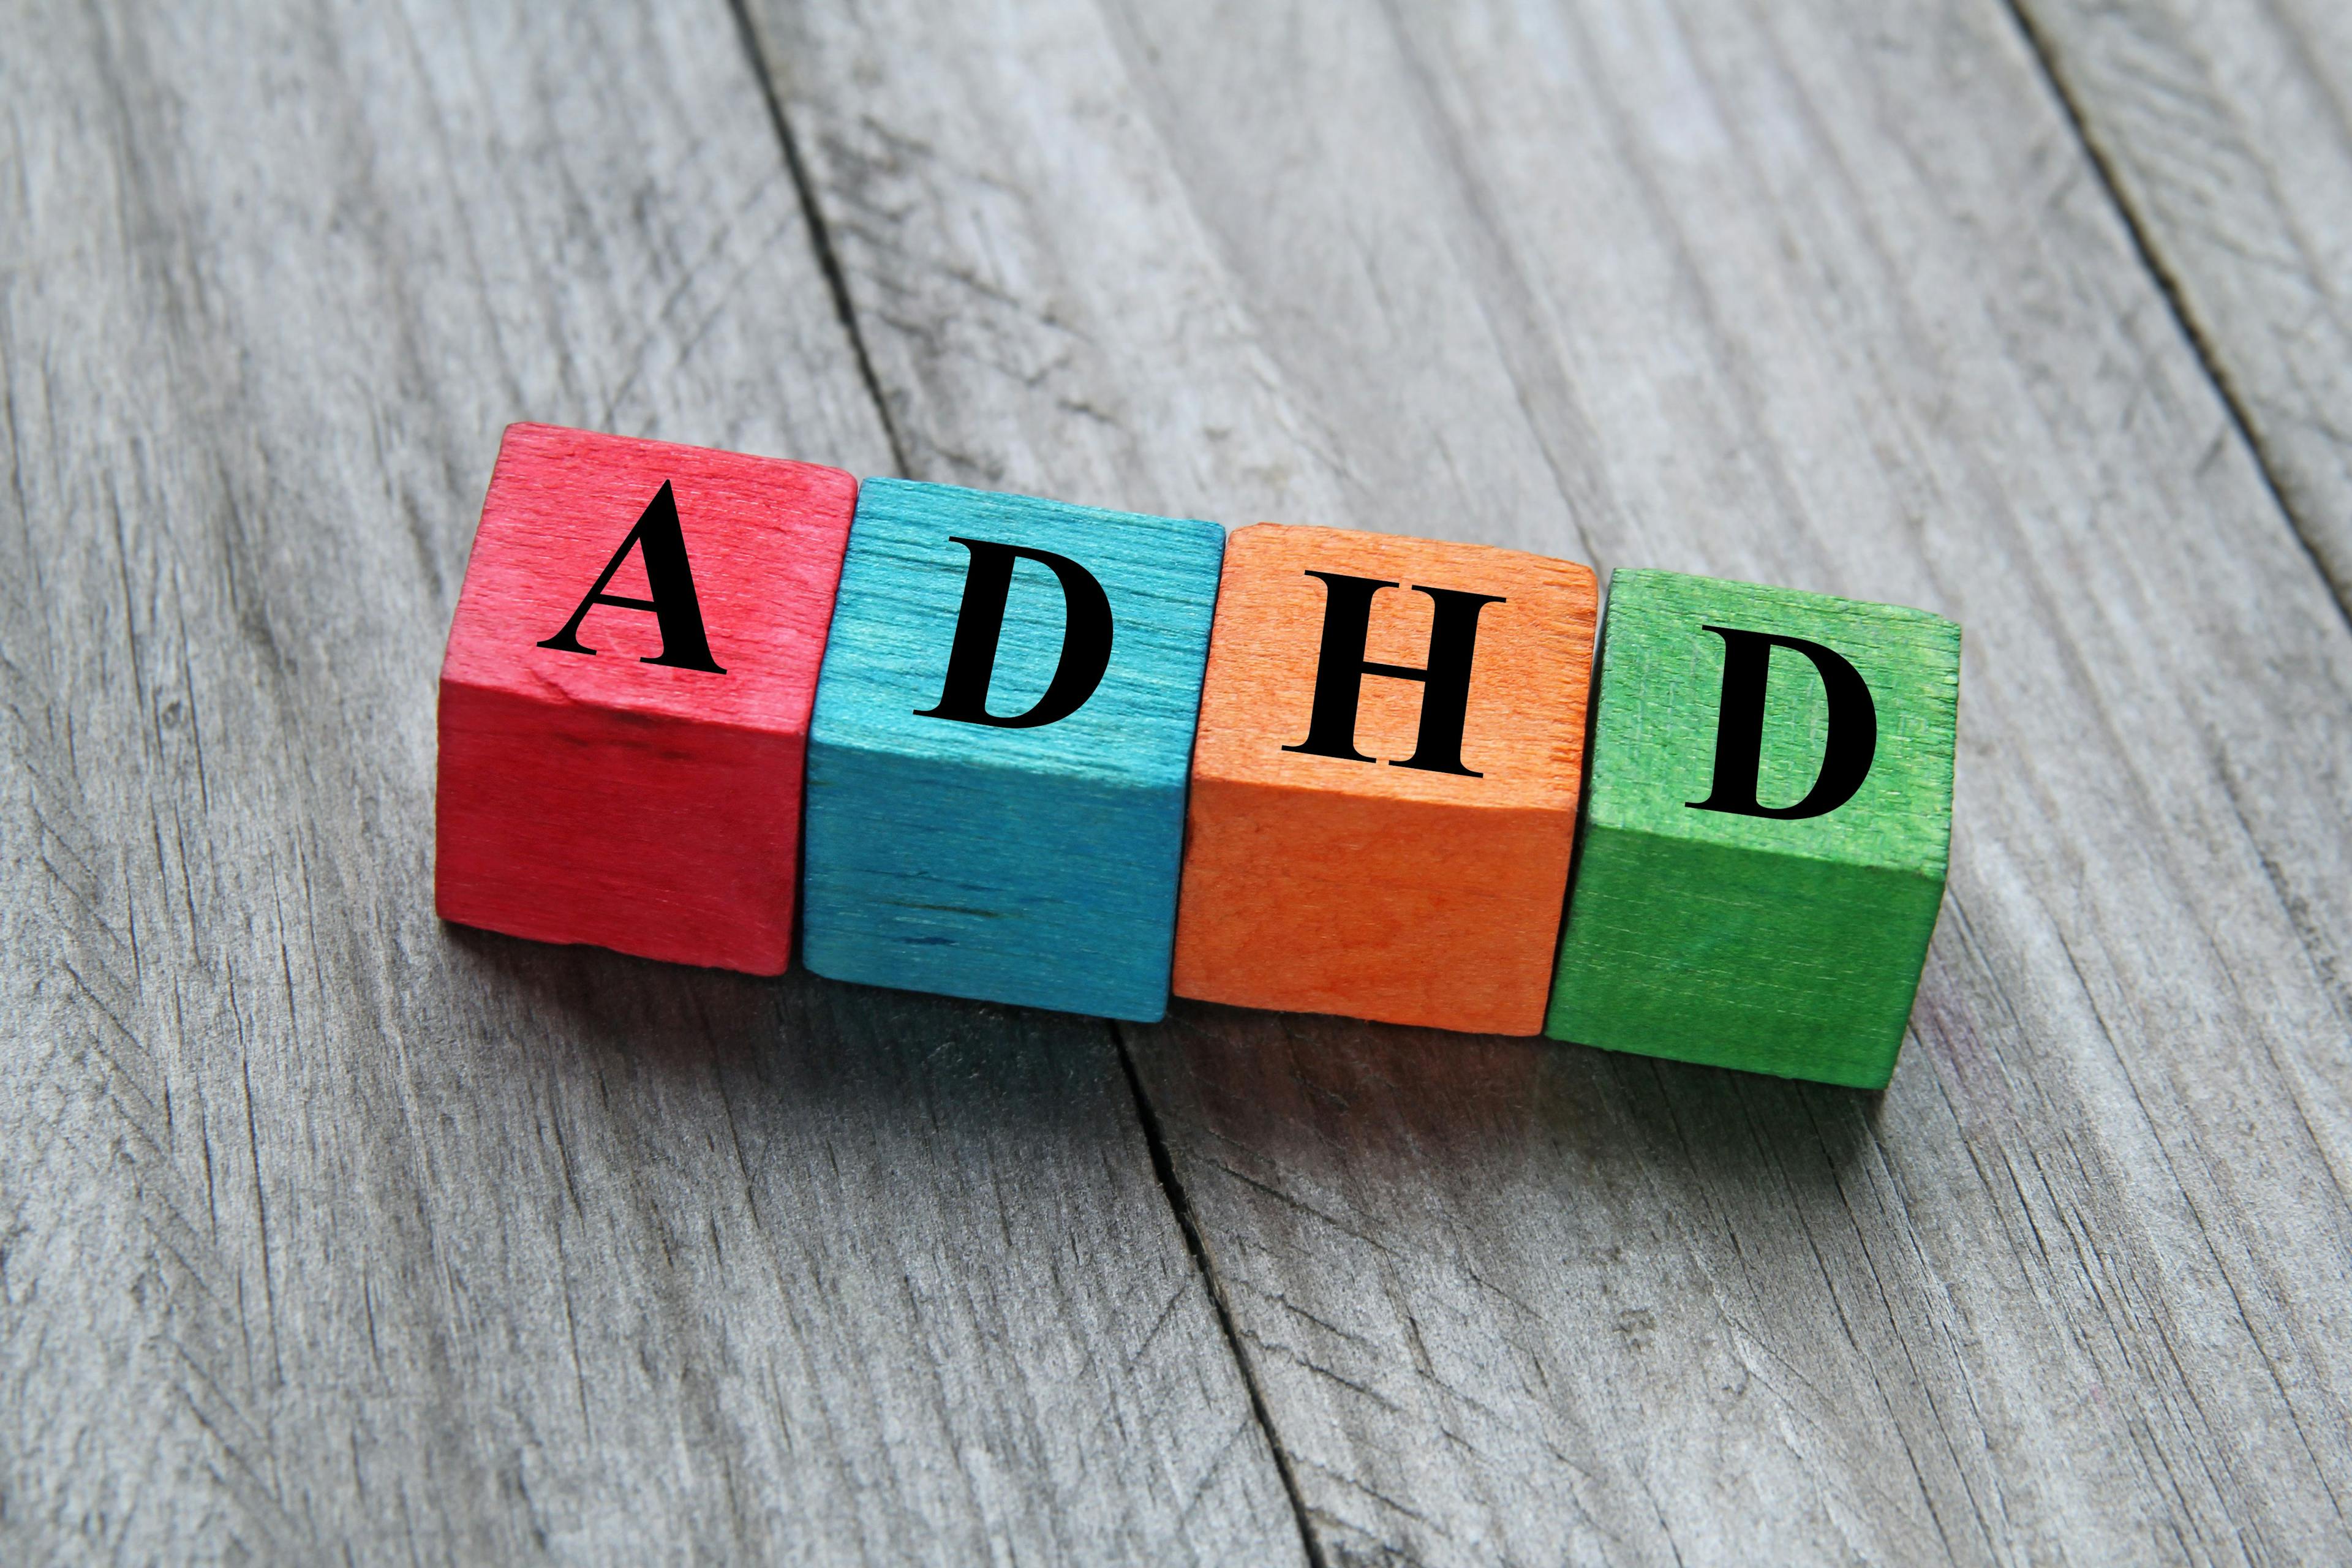 Prenatal analgesic opioid exposure associated with elevated risk of ADHD in children